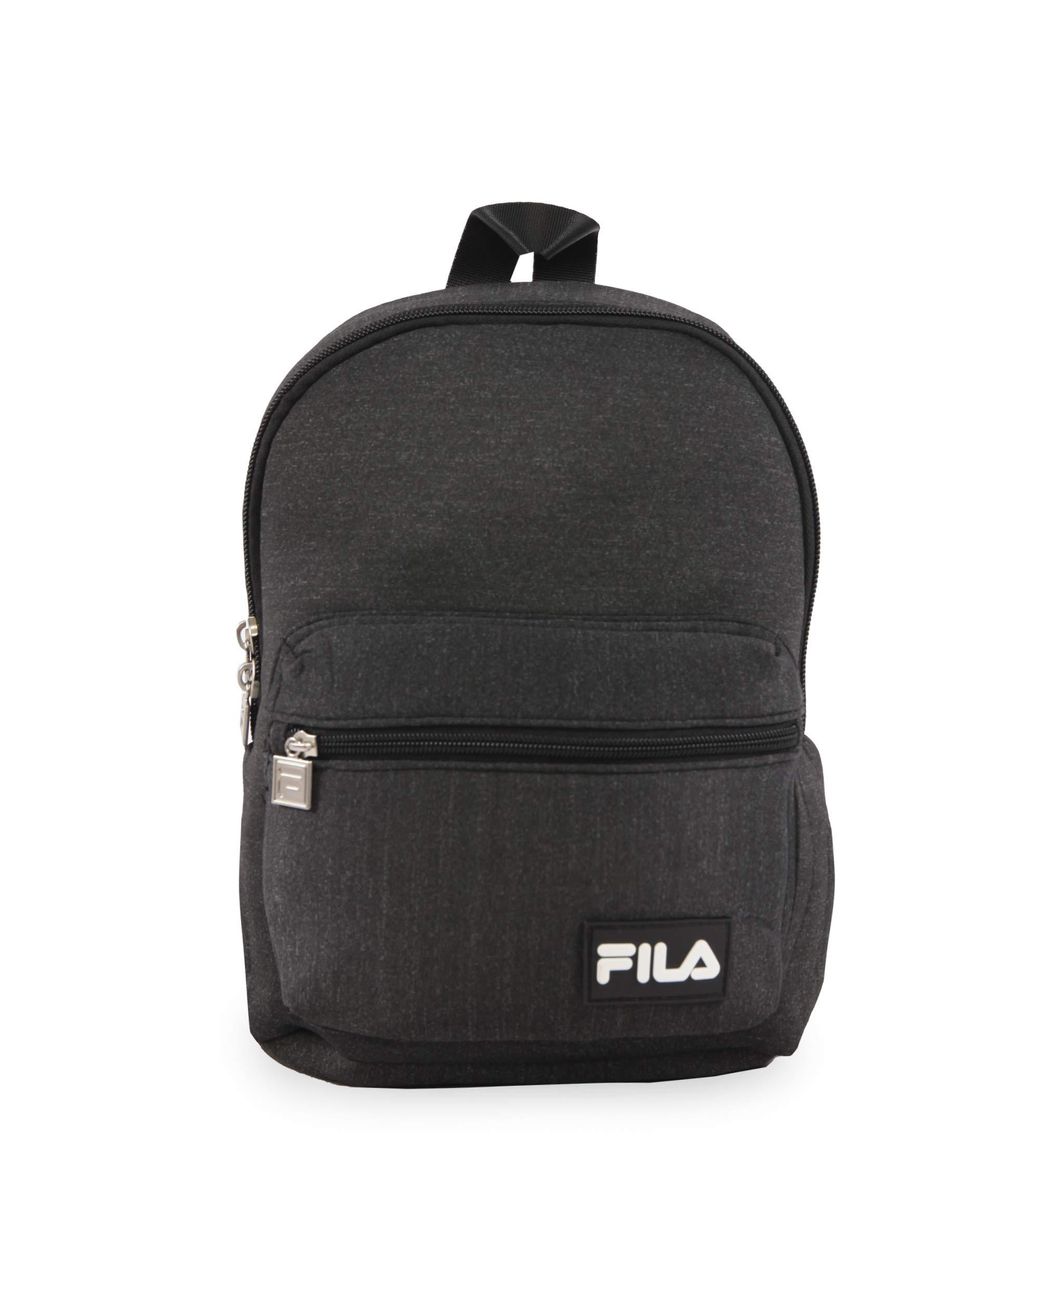 Fila Synthetic Backpack in Black - Save 33% - Lyst